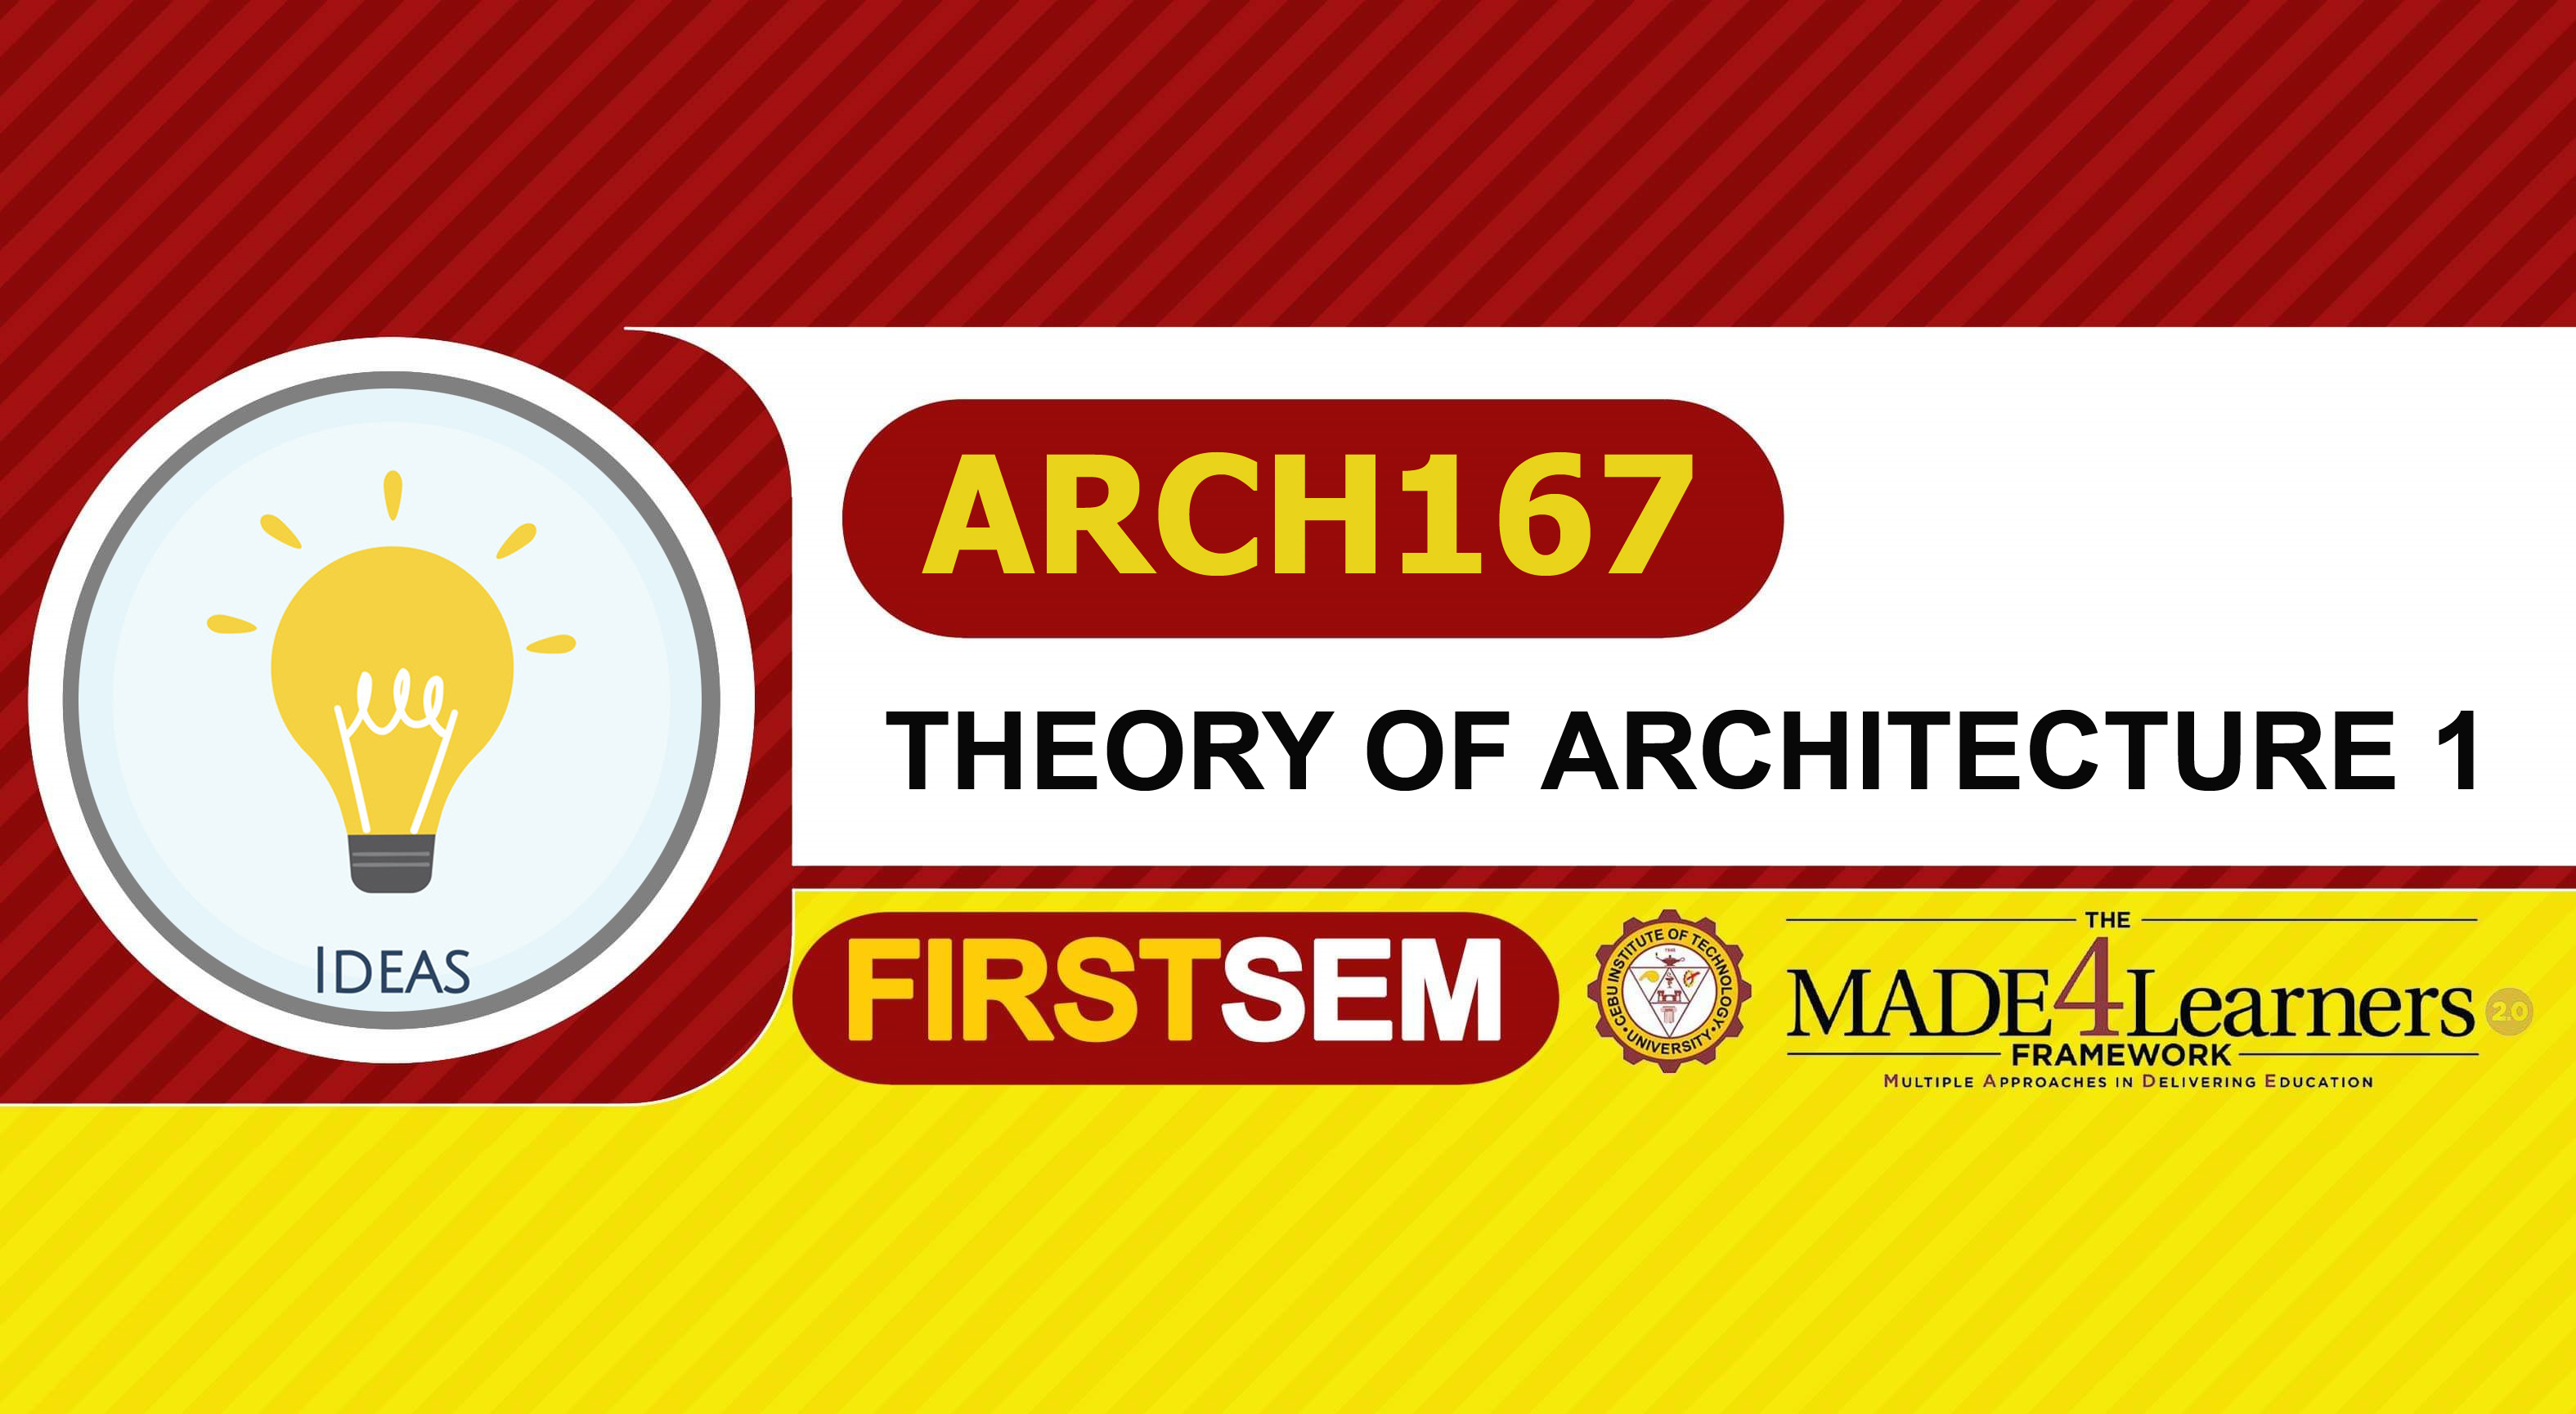 ARCH167: THEORY OF ARCHITECTURE 1